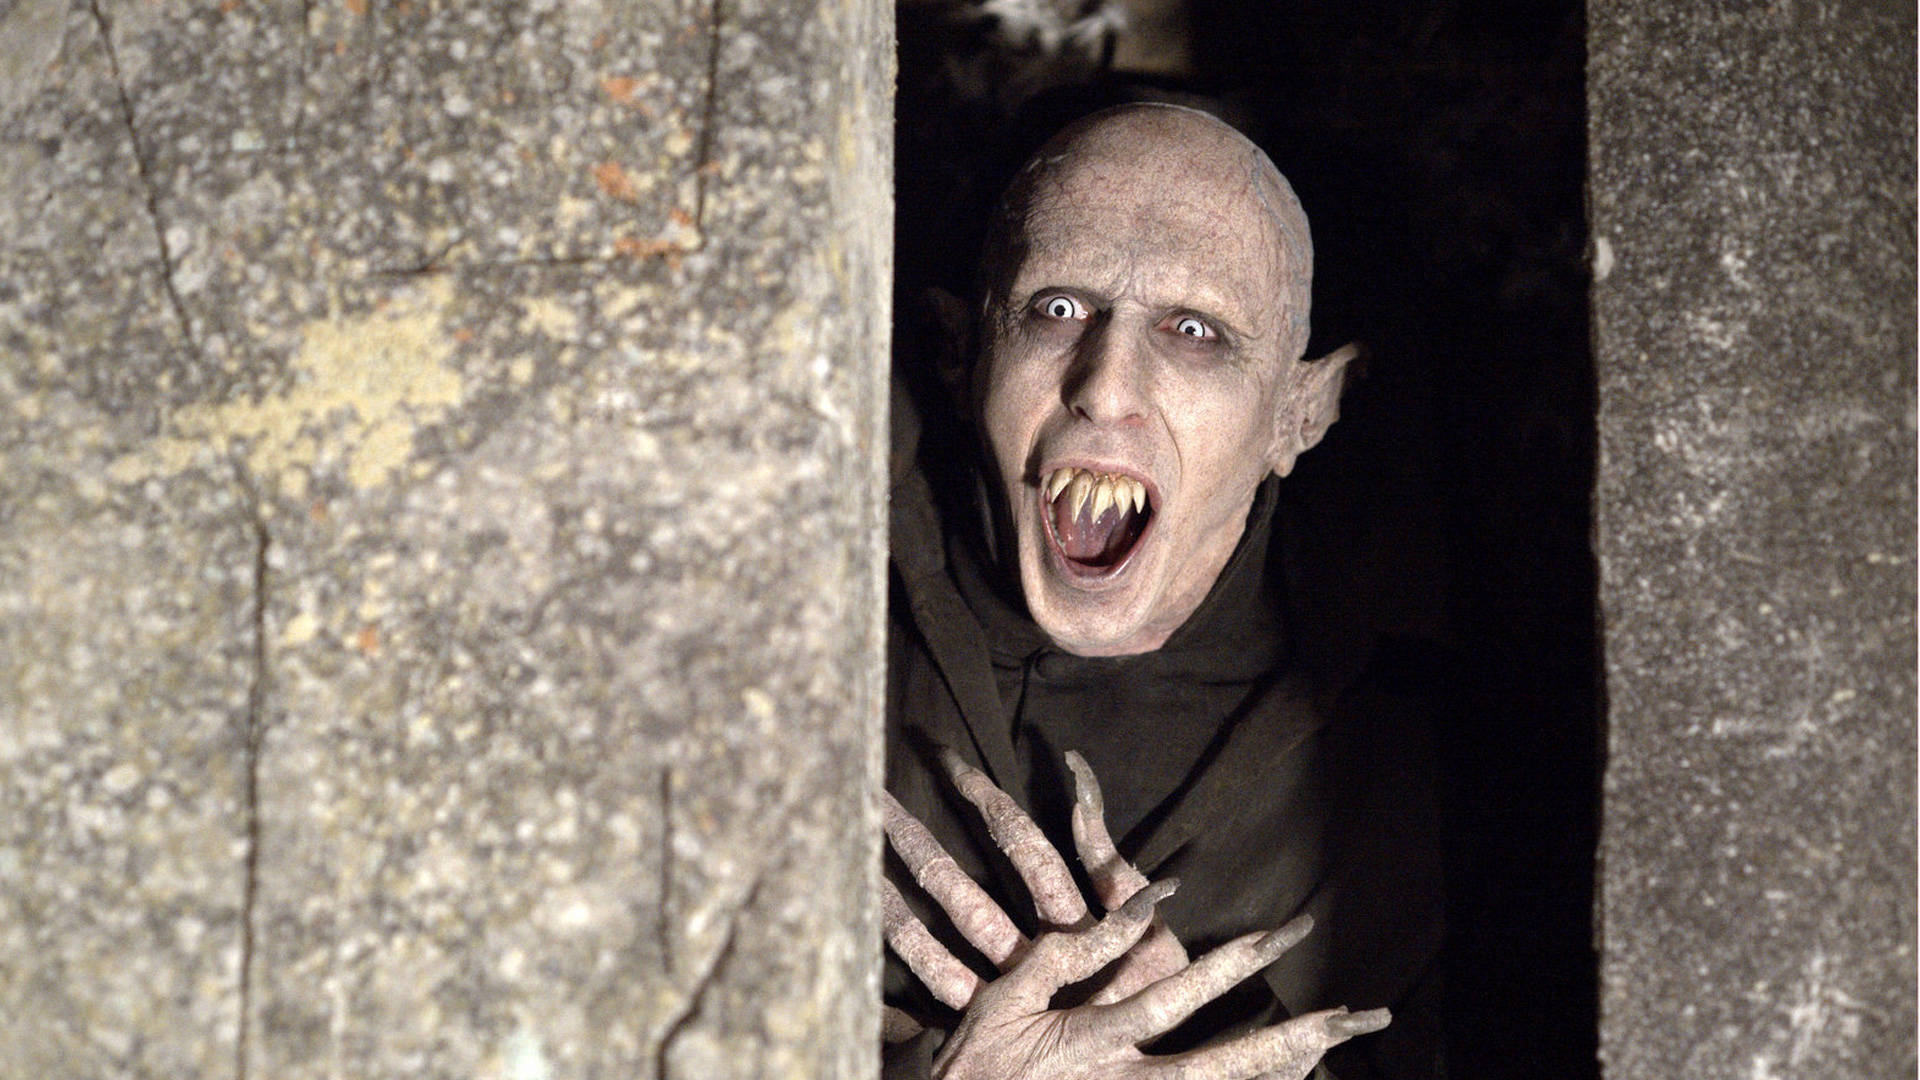 What We Do In The Shadows Shocked Petyr Background